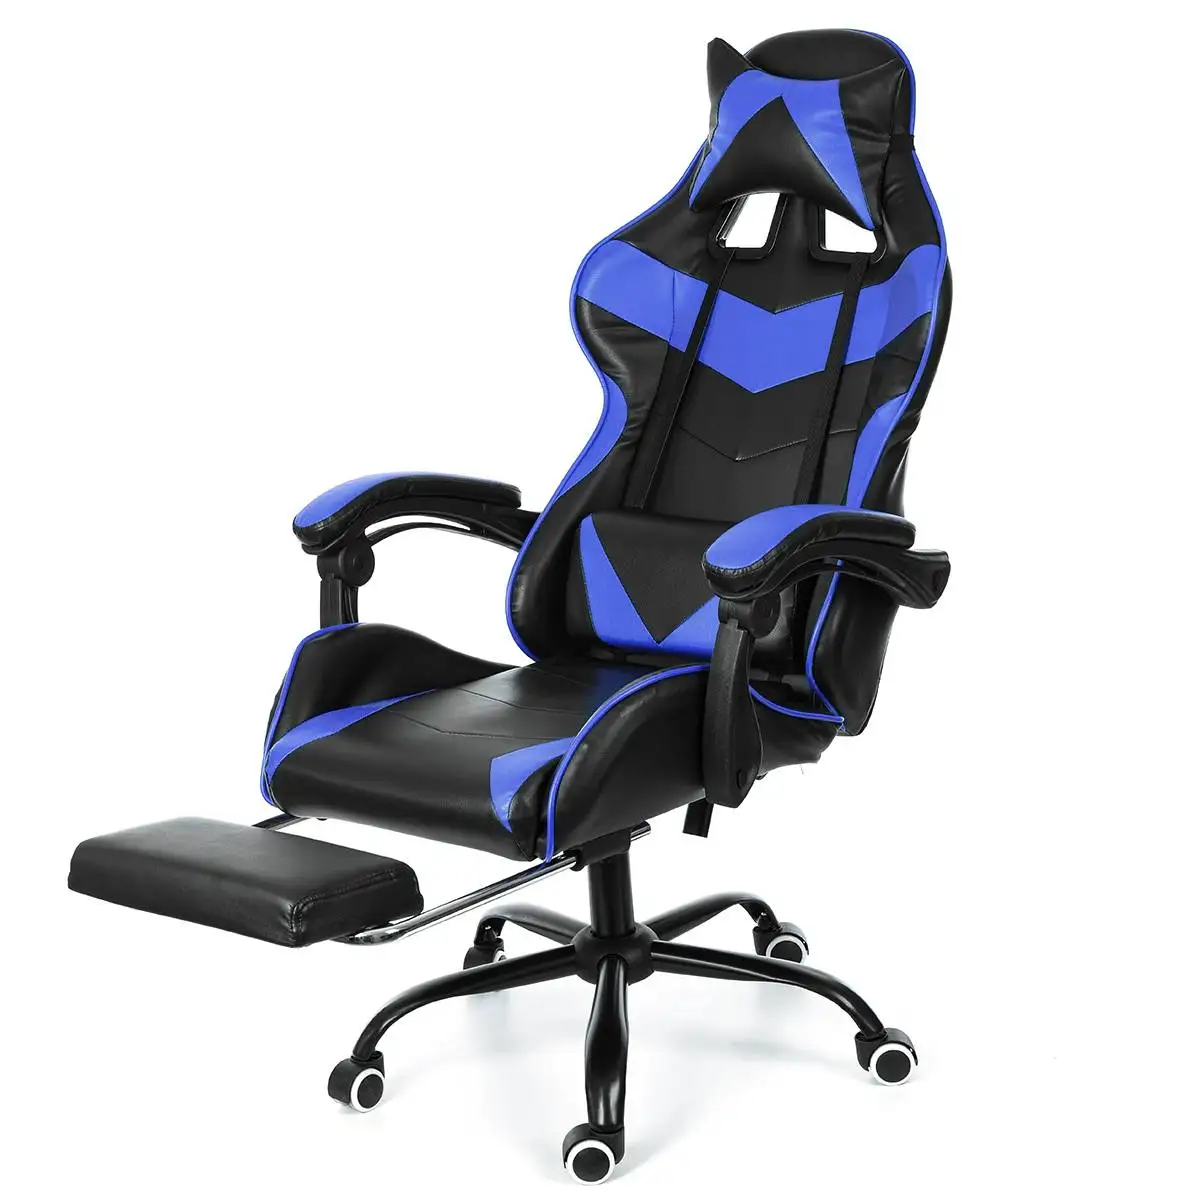 

Office Chair Computer Gamer Chair Home Internet WCG Chairs Gaming Ergonomic Office Swivel Lifting Desk Chair with Lying Footrest